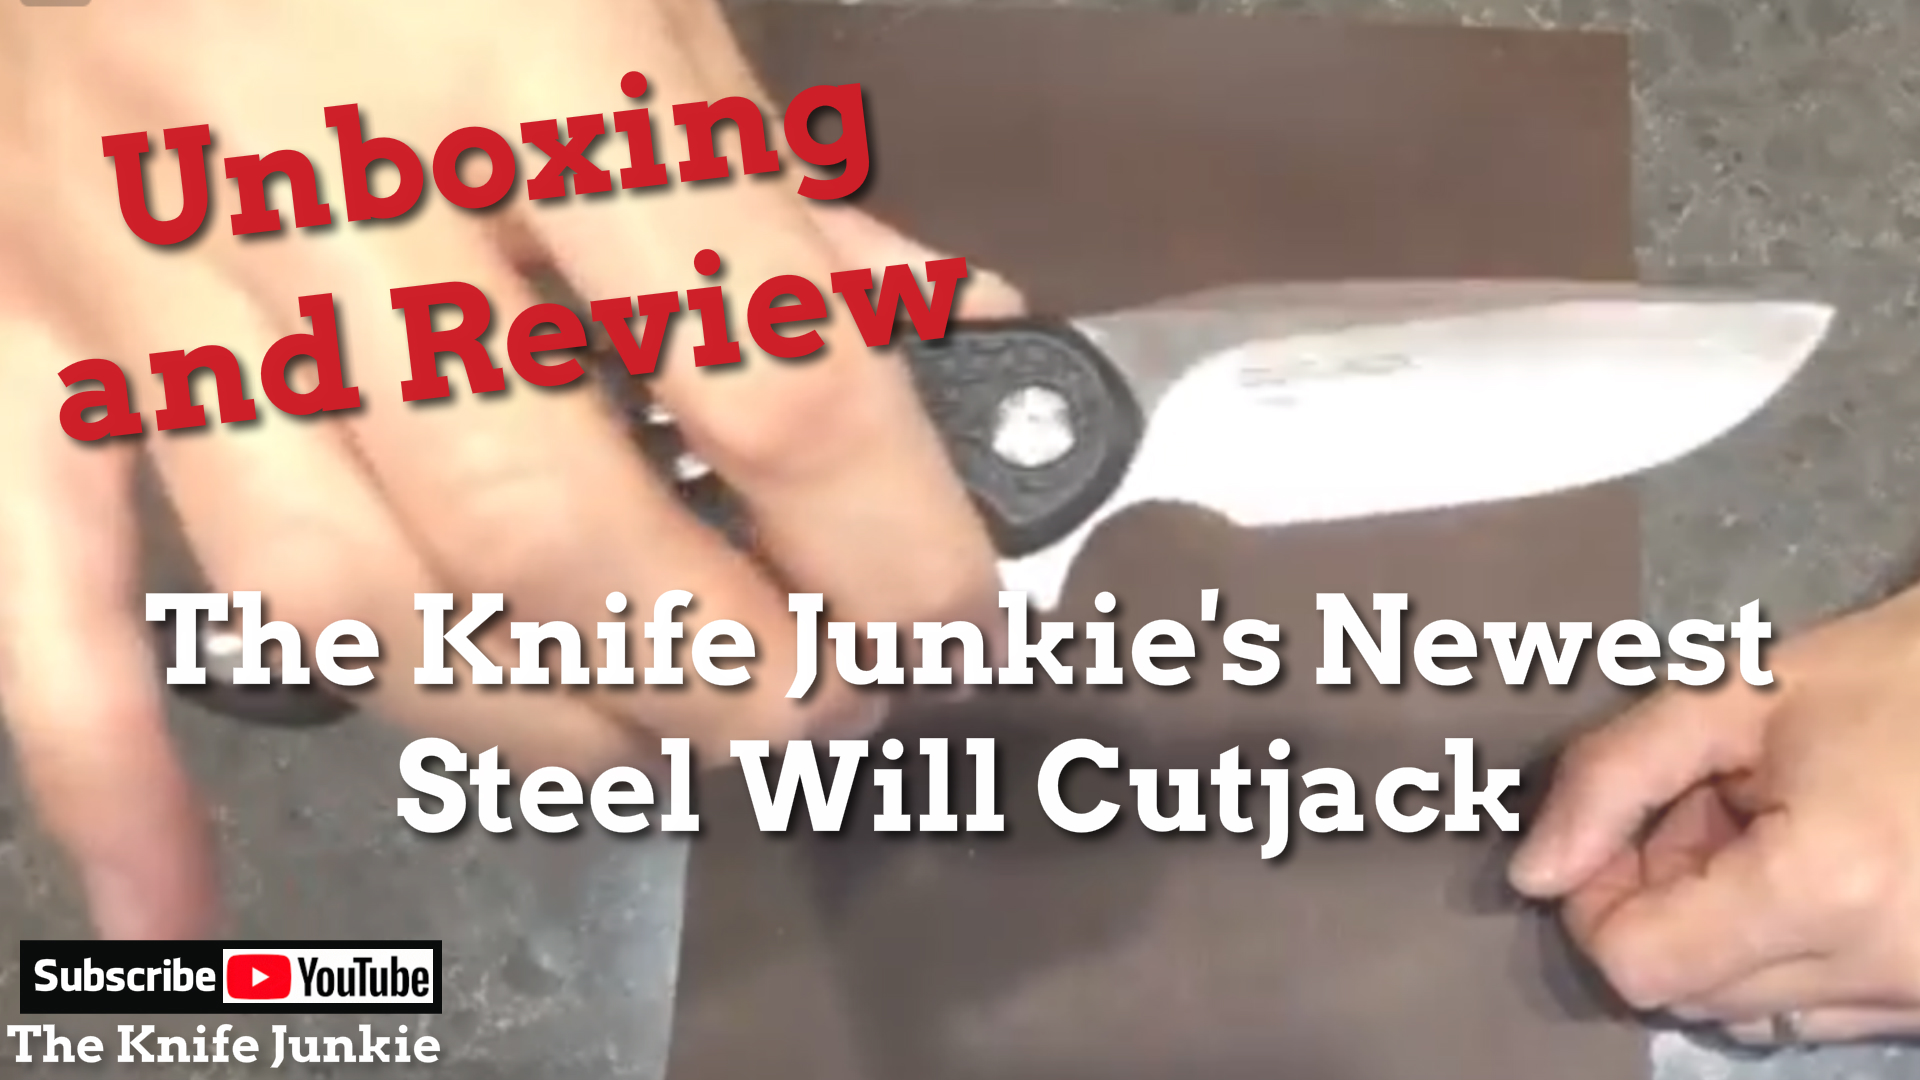 The Knife Junkie's Newest -- a Steel Will Cutjack